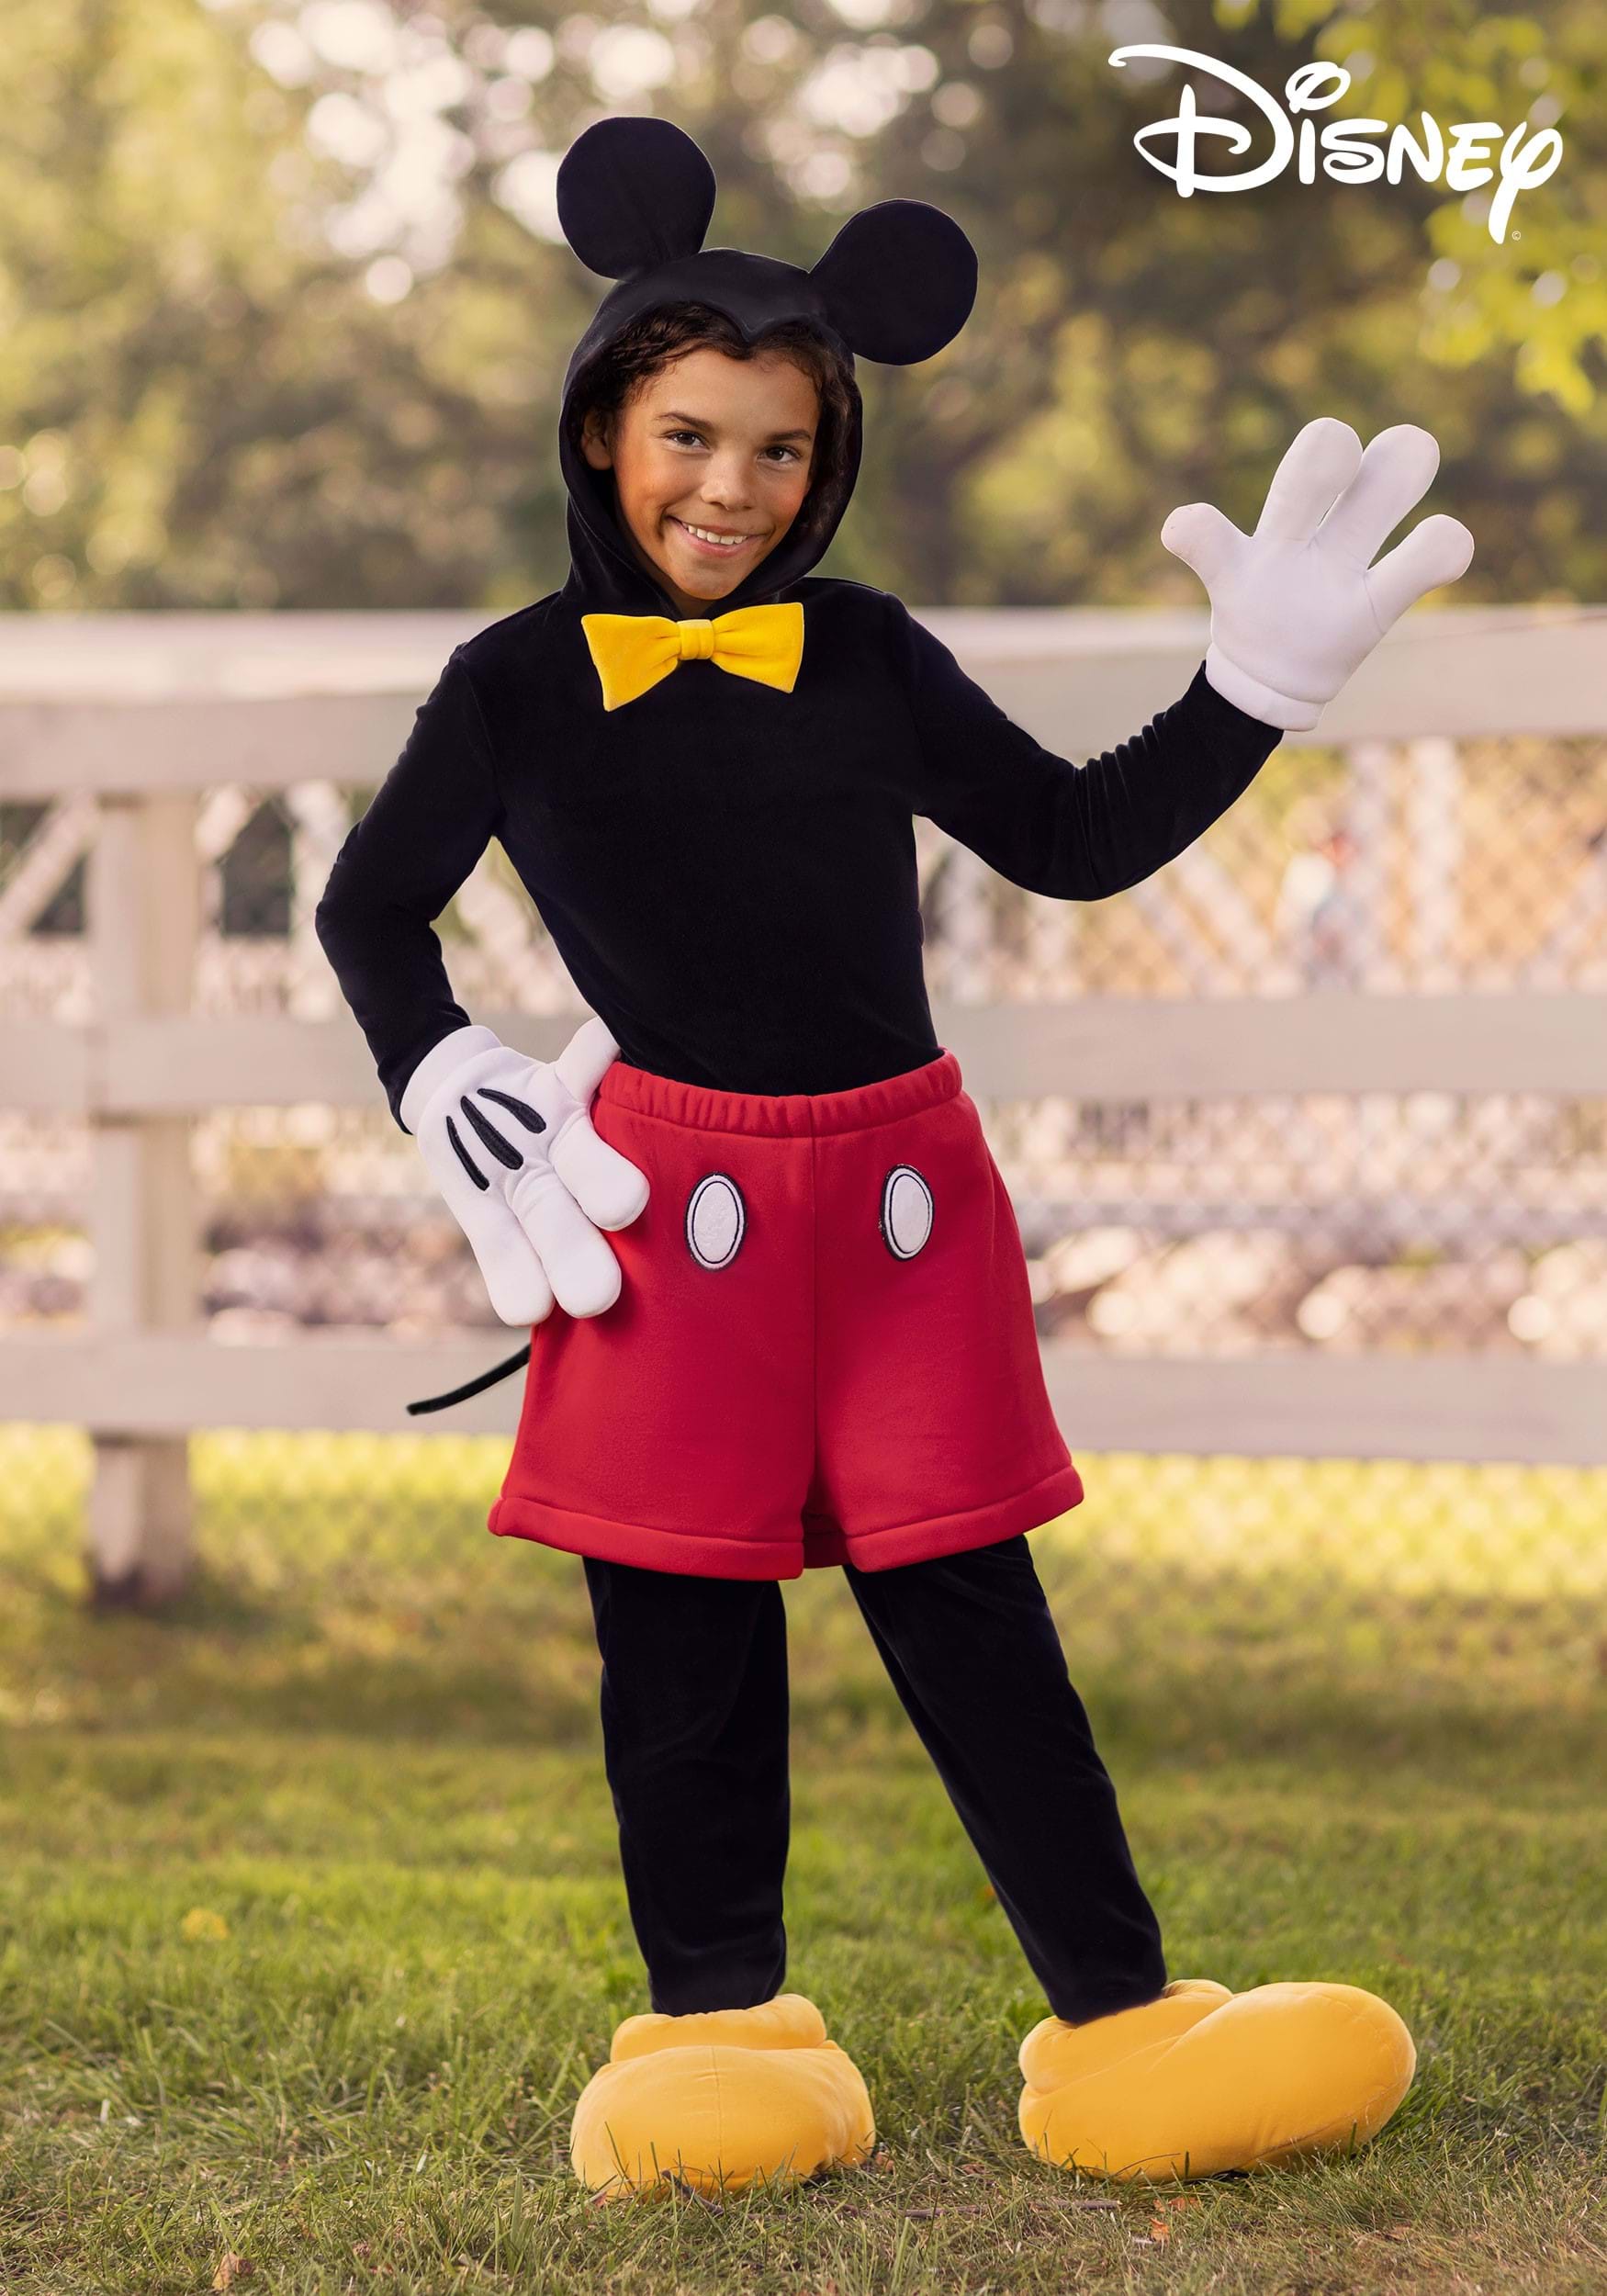 https://images.halloweencostumes.com/products/74864/1-1/kids-deluxe-mickey-mouse-costume.jpg